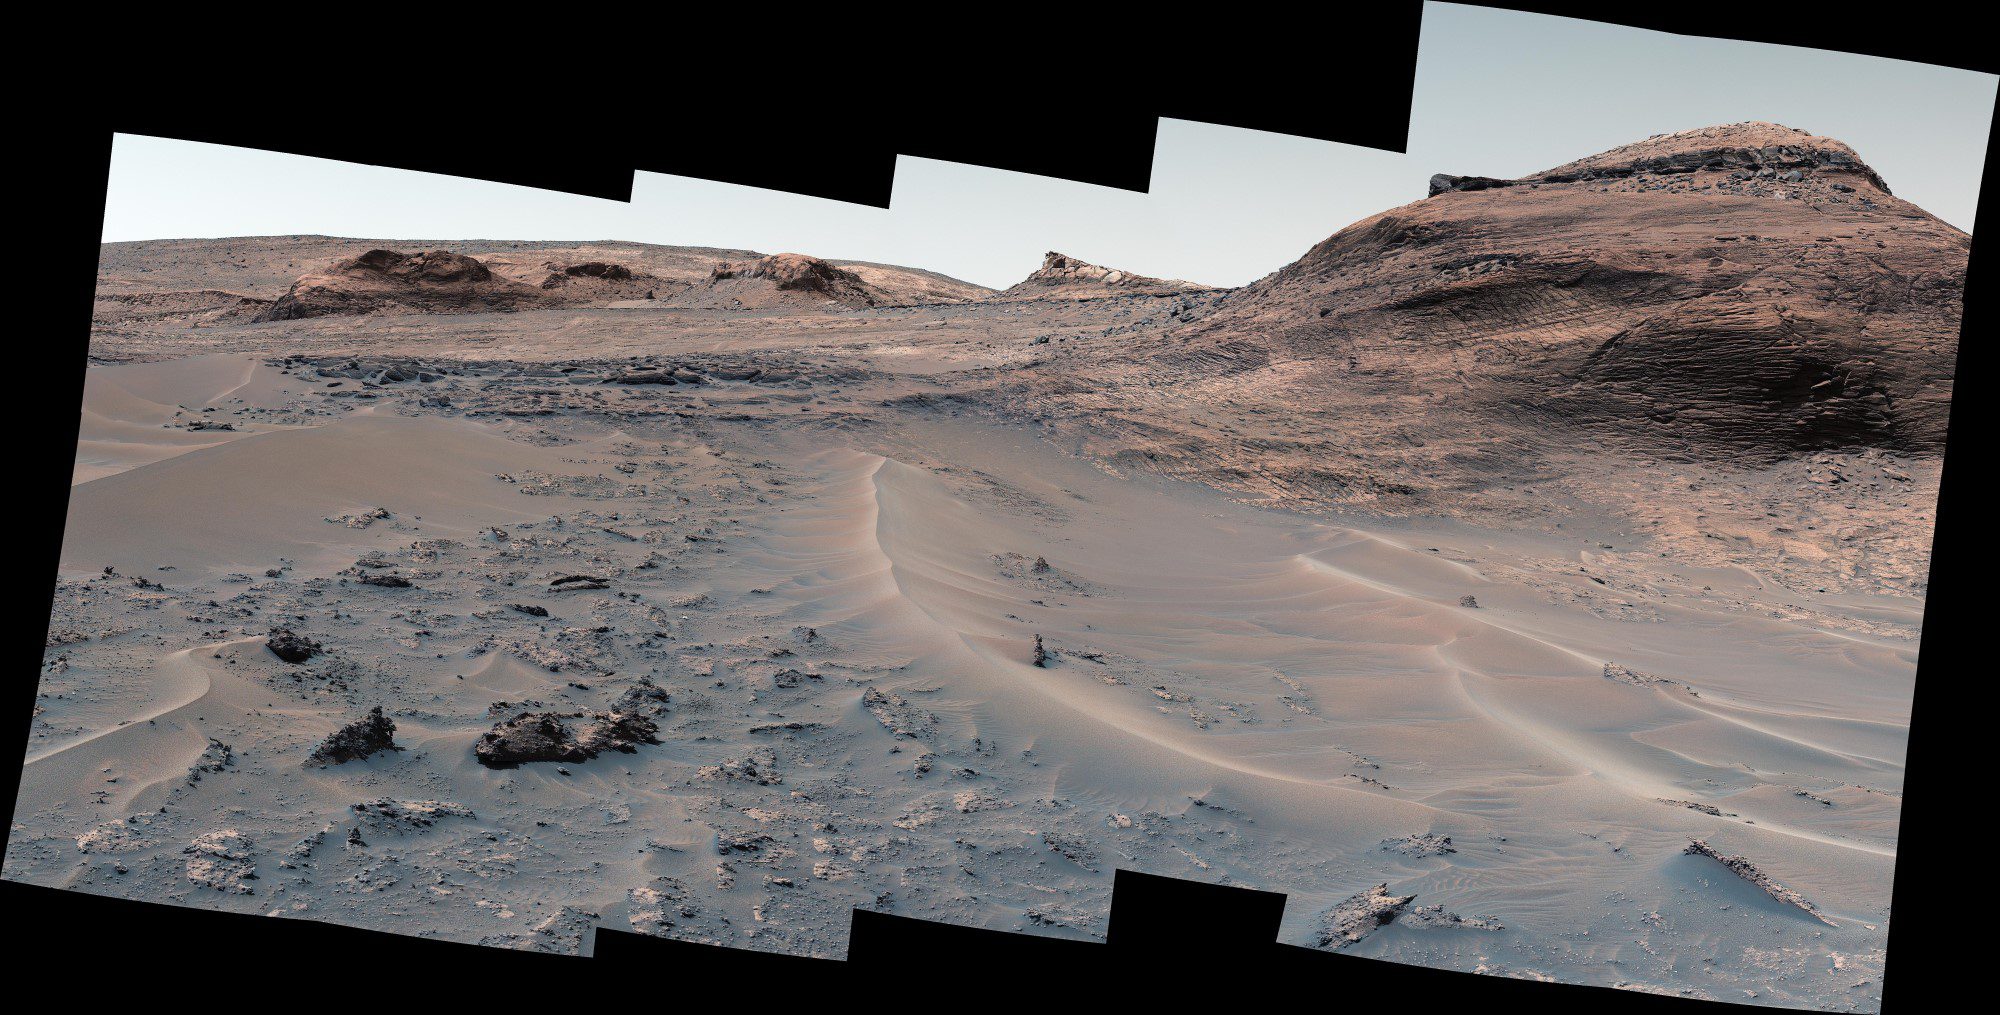 NASA's Mars Curiosity rover arrives at an interesting salty location after a perilous journey